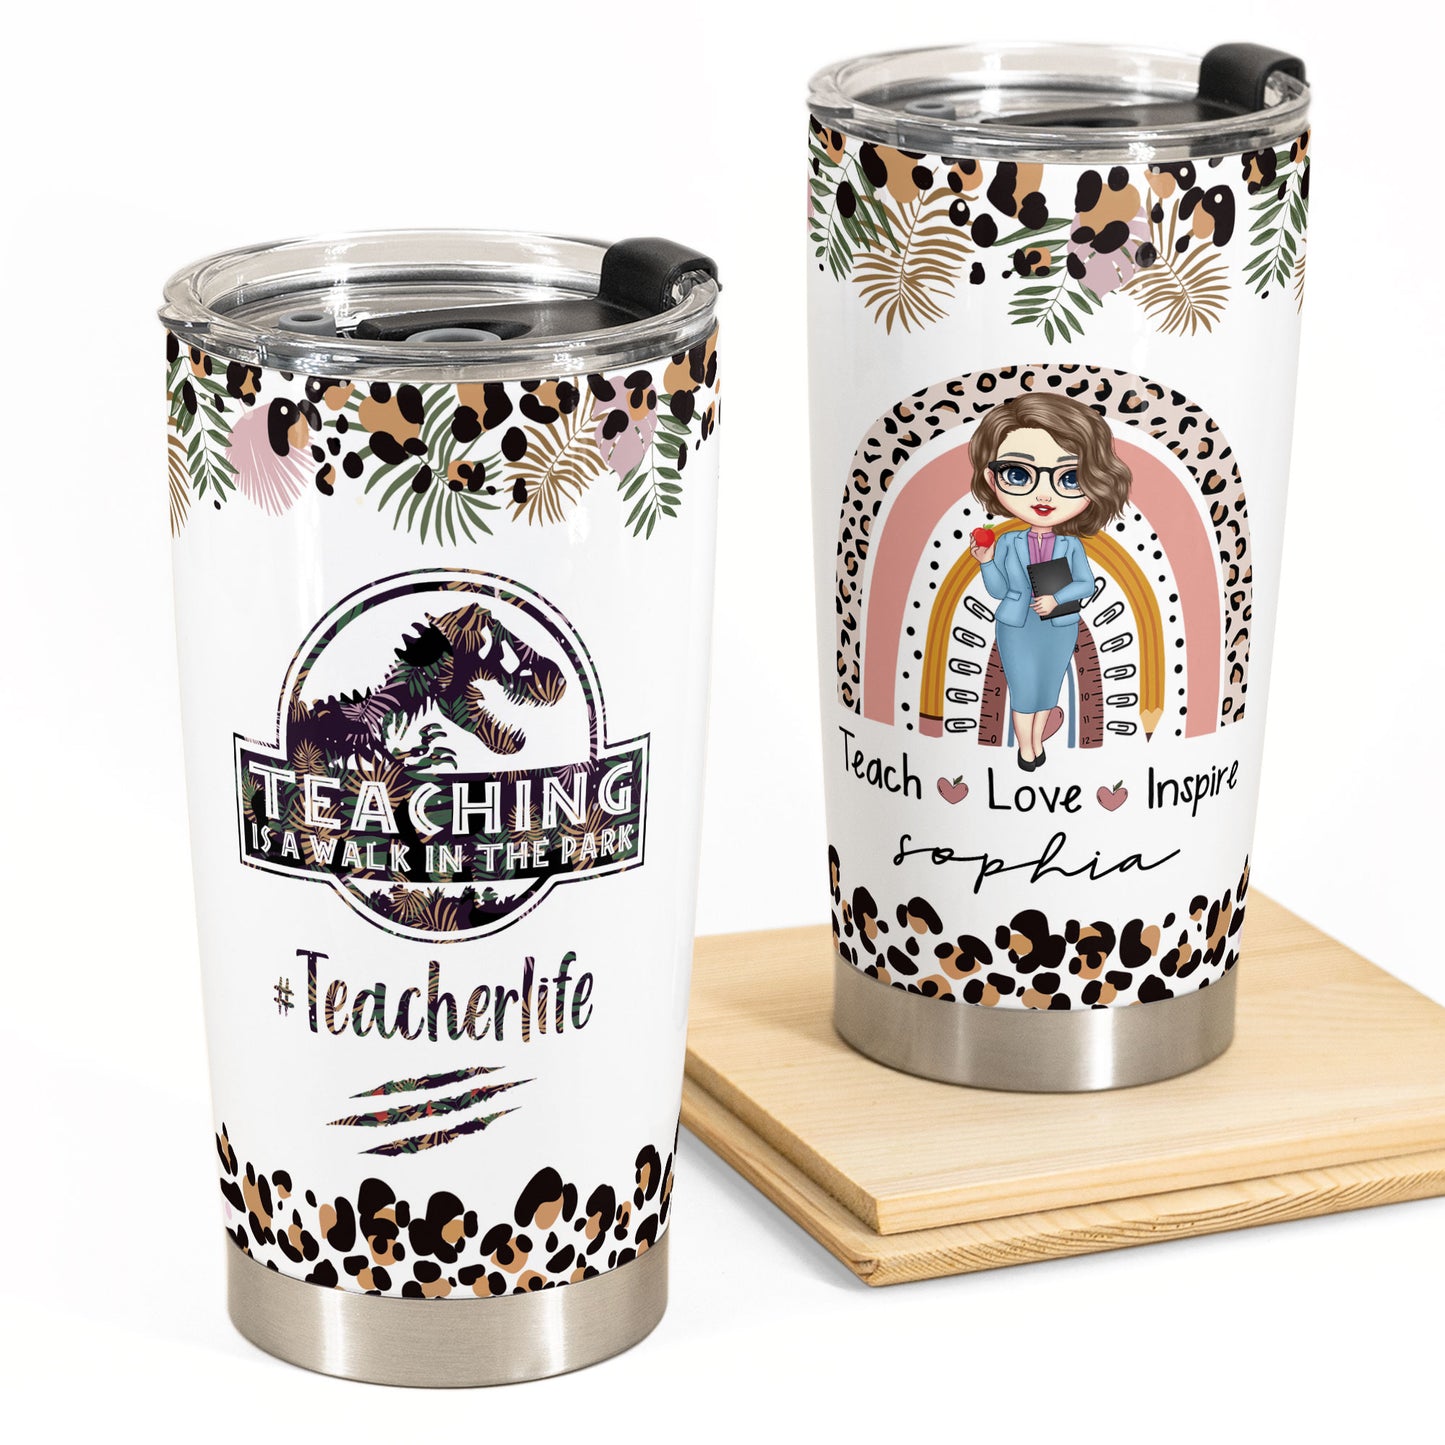 Teaching Is A Walk In The Park - Personalized Tumbler Cup - Back To School Gift For Teacher